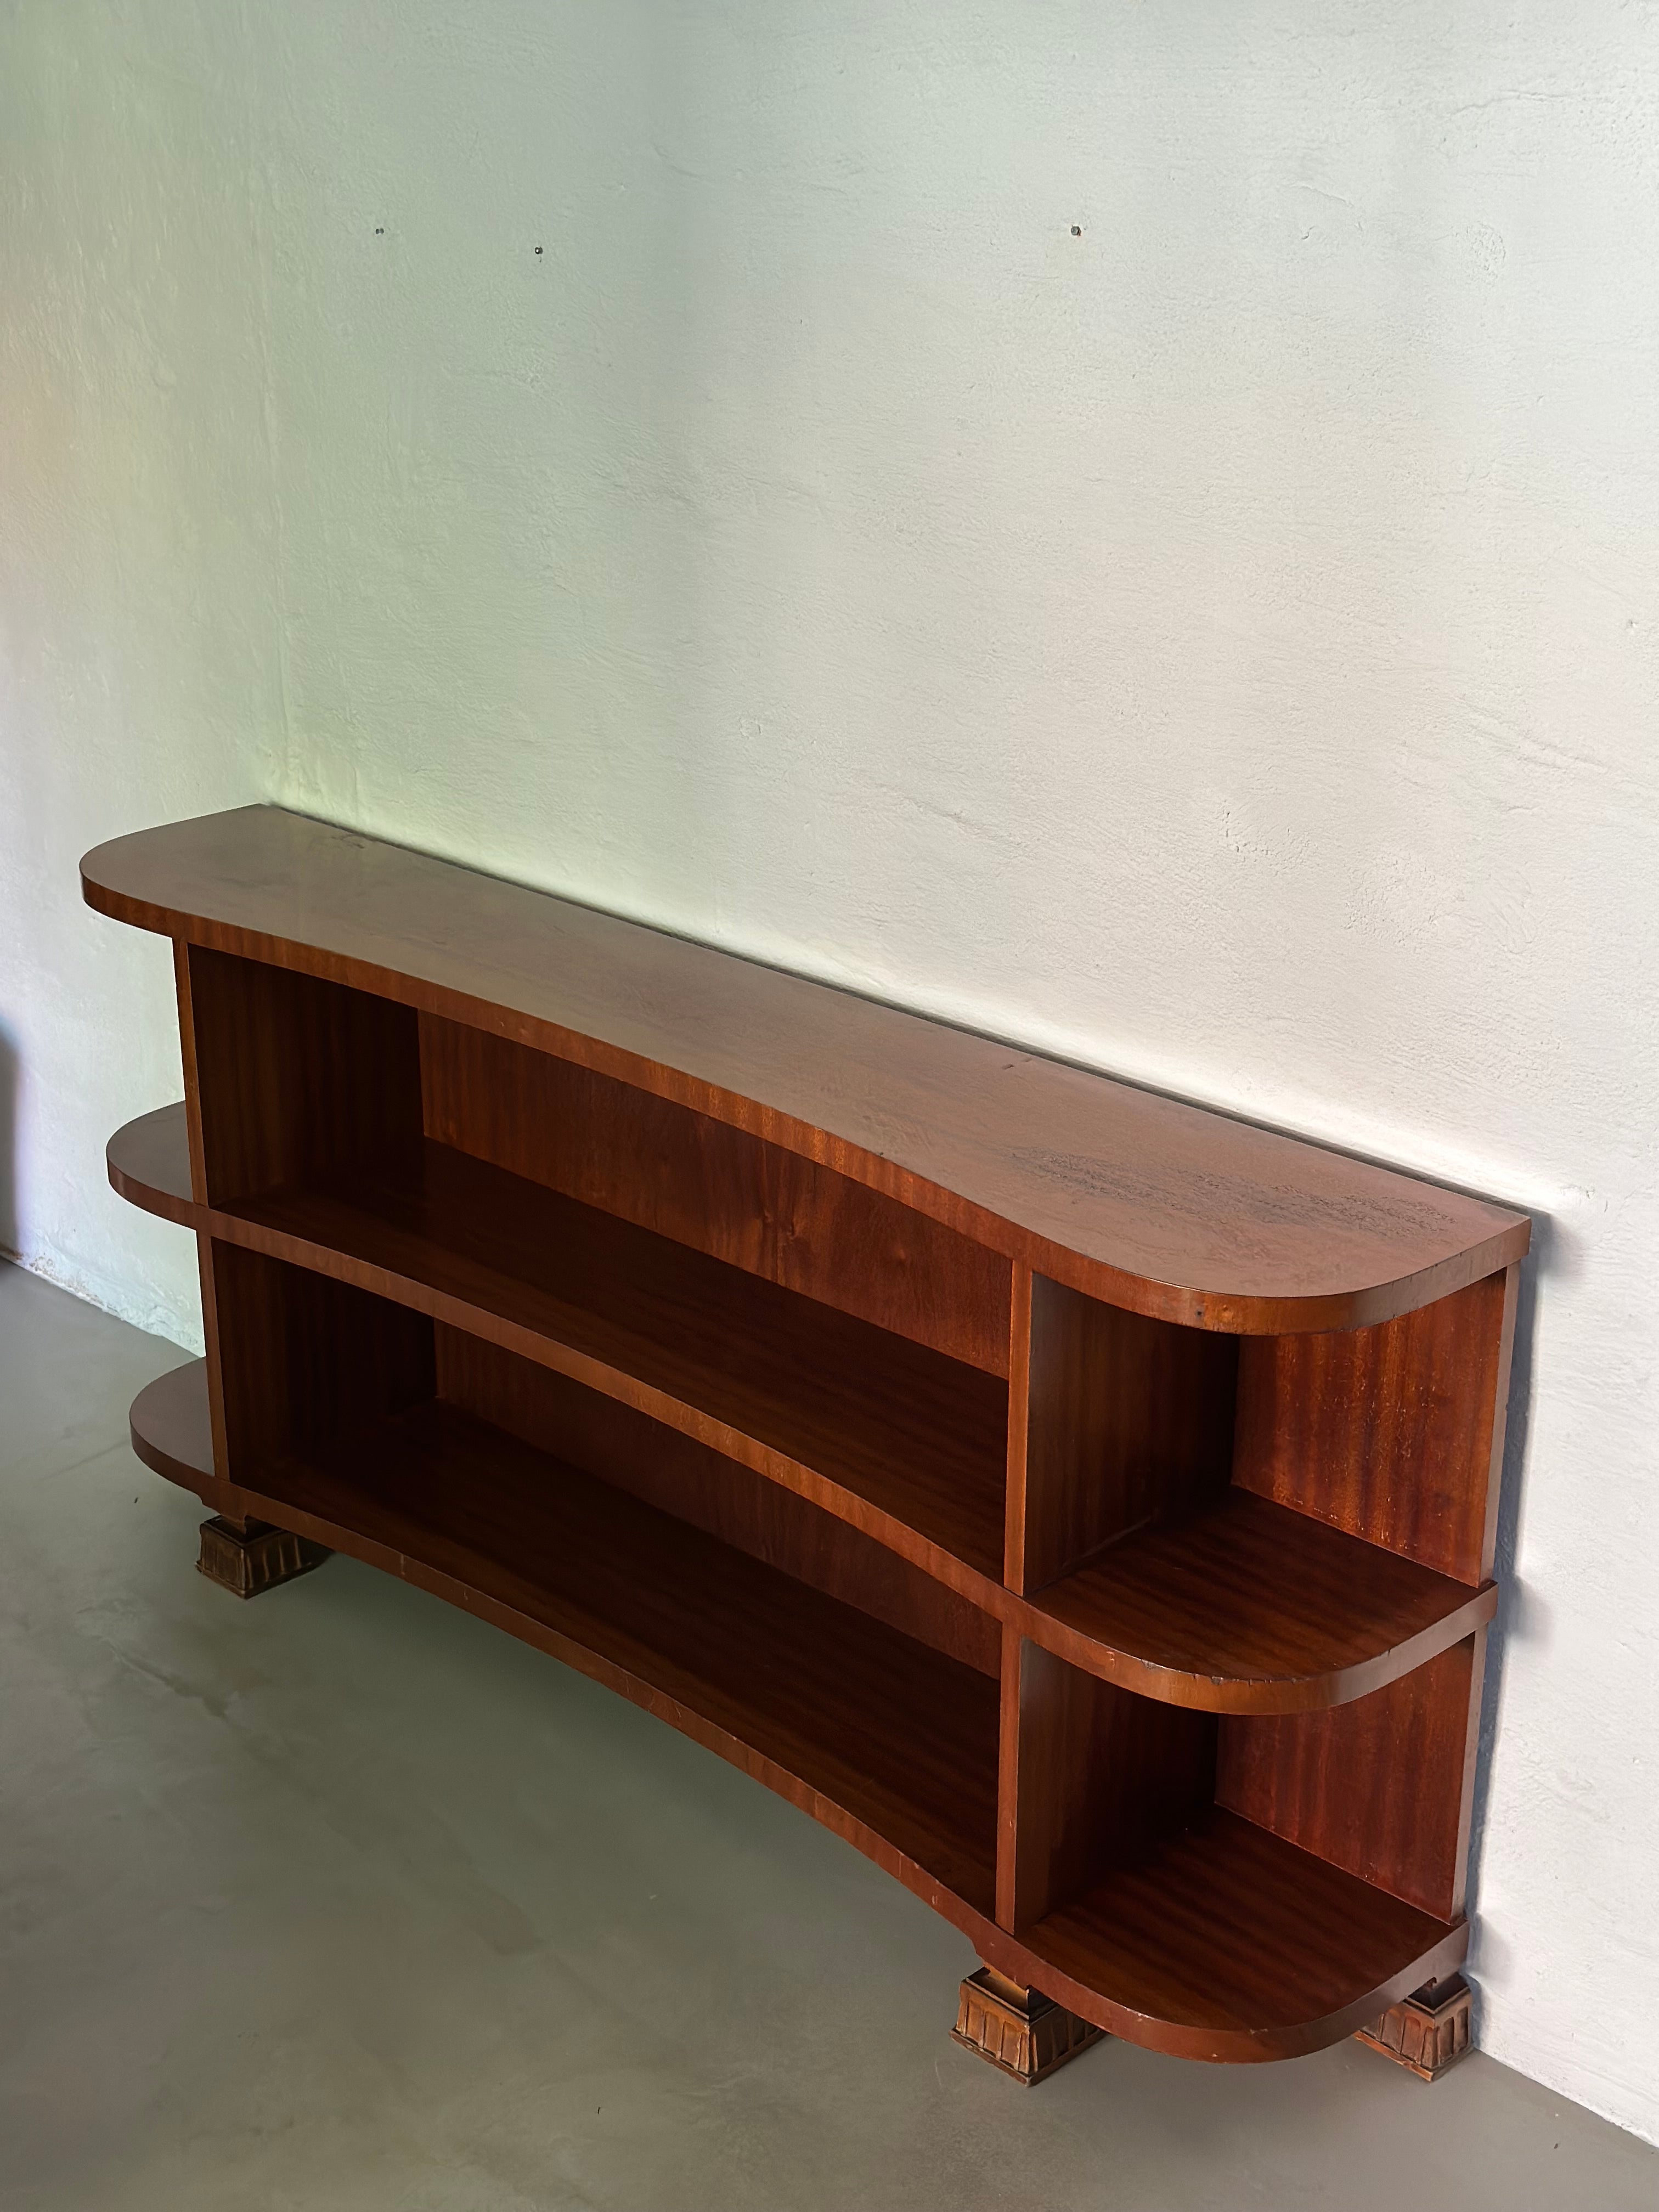 Swedish Art Deco bookcase or shelf with a nicely curved front and Mahogany veneer. Very rare and decorative piece. By unknown maker, circa 1940s. 

Width: 165 cm
Depth: 30 cm
Height: 77 cm

In good vintage condition, light signs of wear. Some